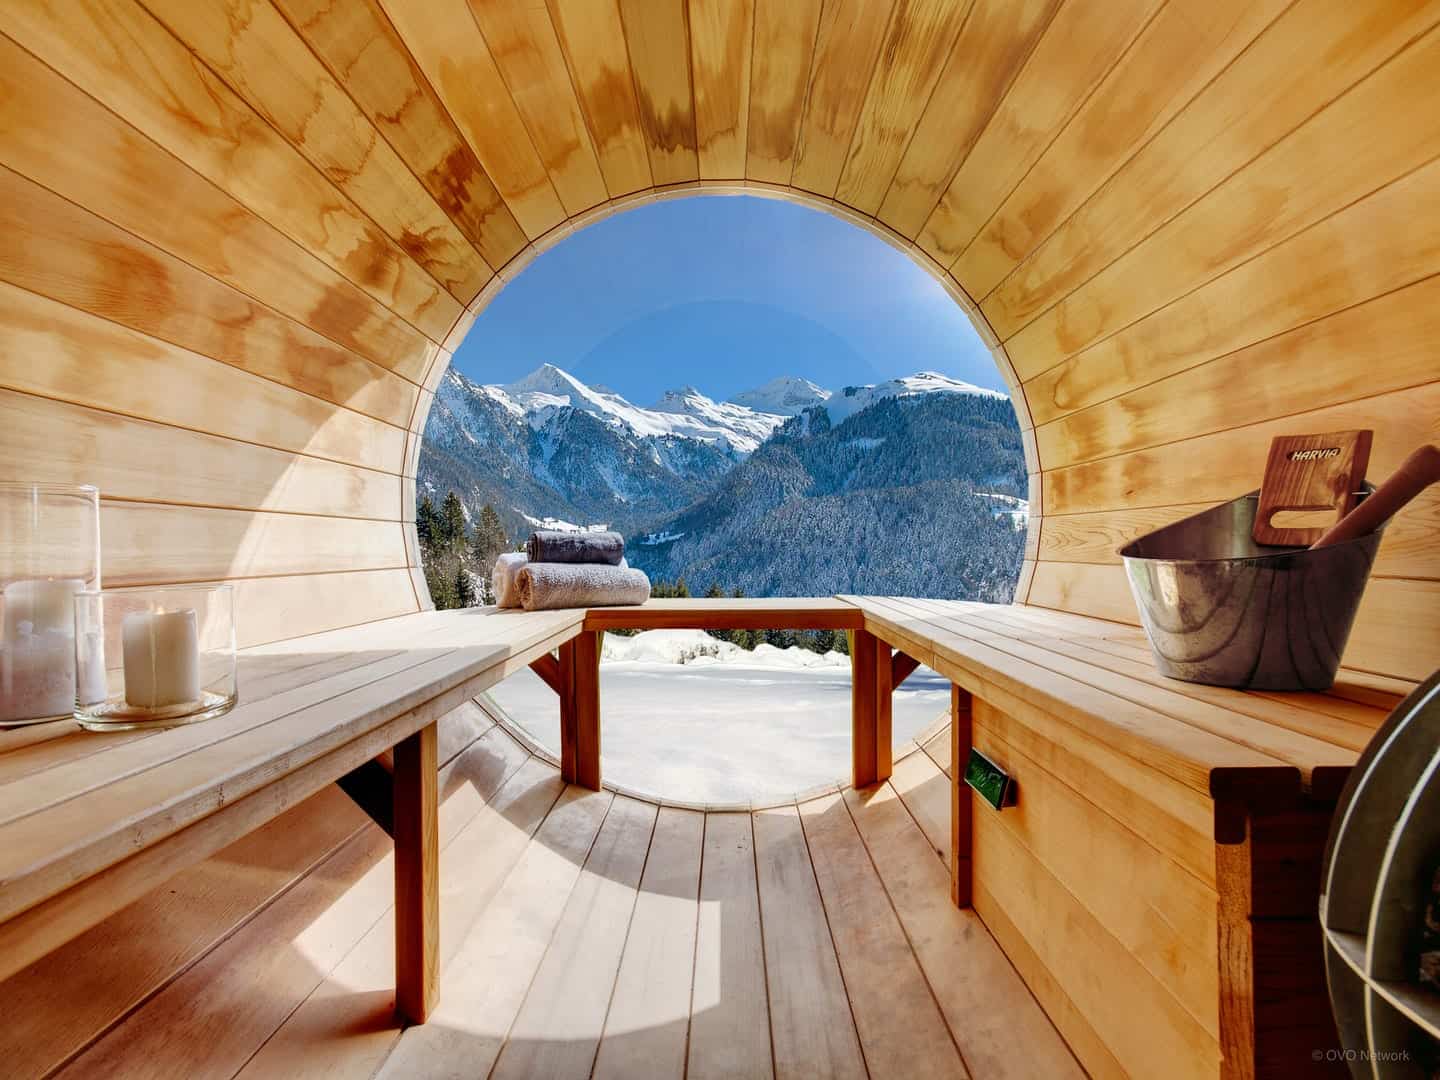 The view from the barrel sauna at Chalet Manoe